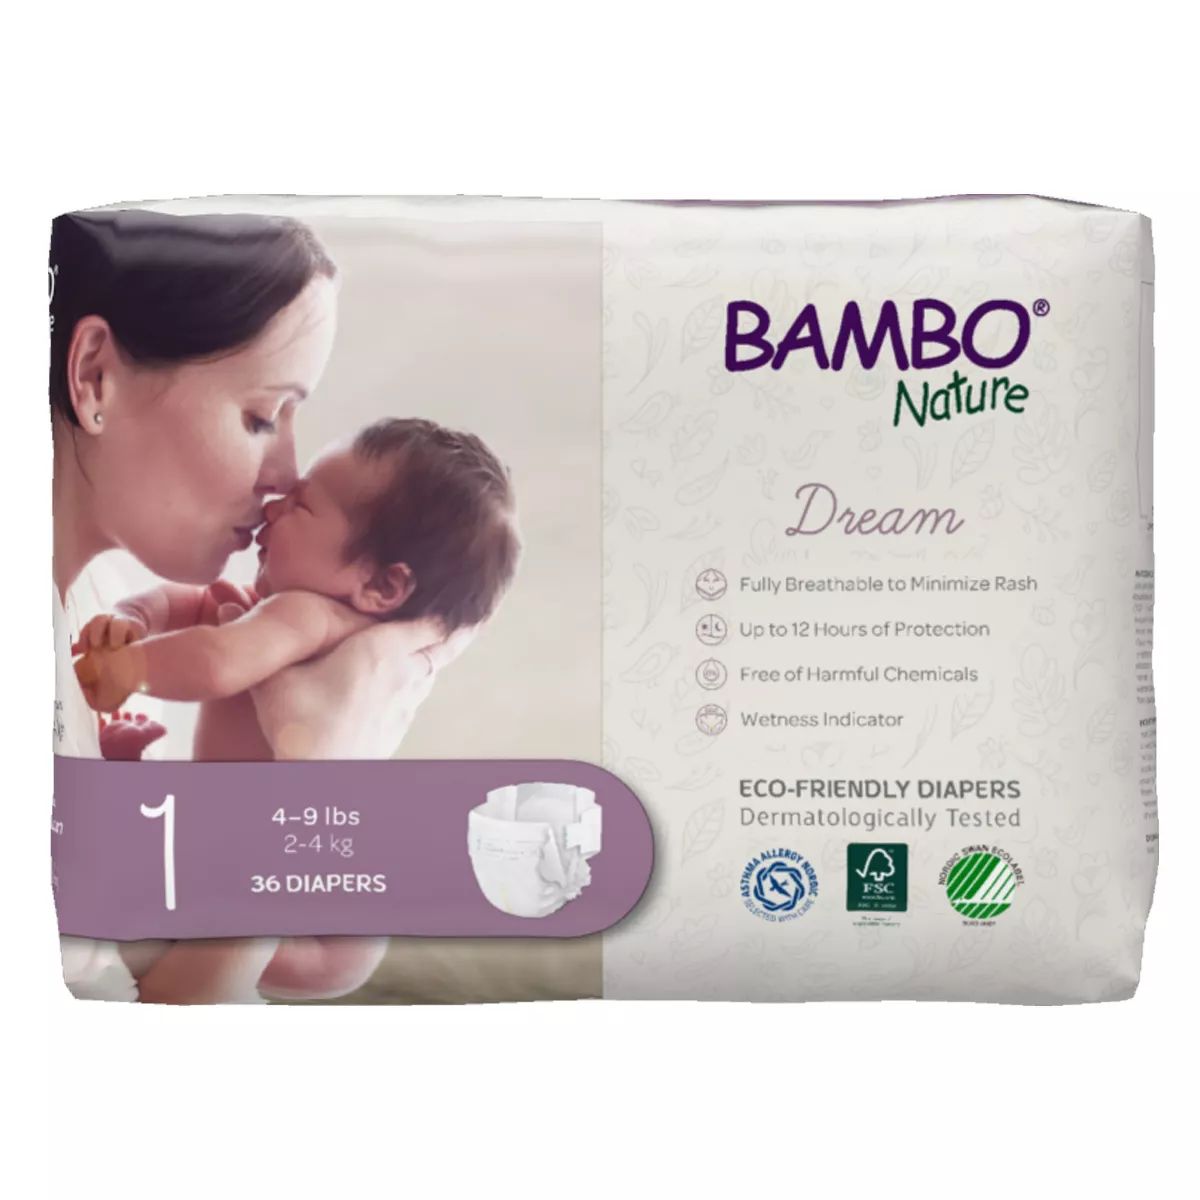 Bambo Nature Dream Disposable Diapers, Eco-Friendly, Size 1 | Target